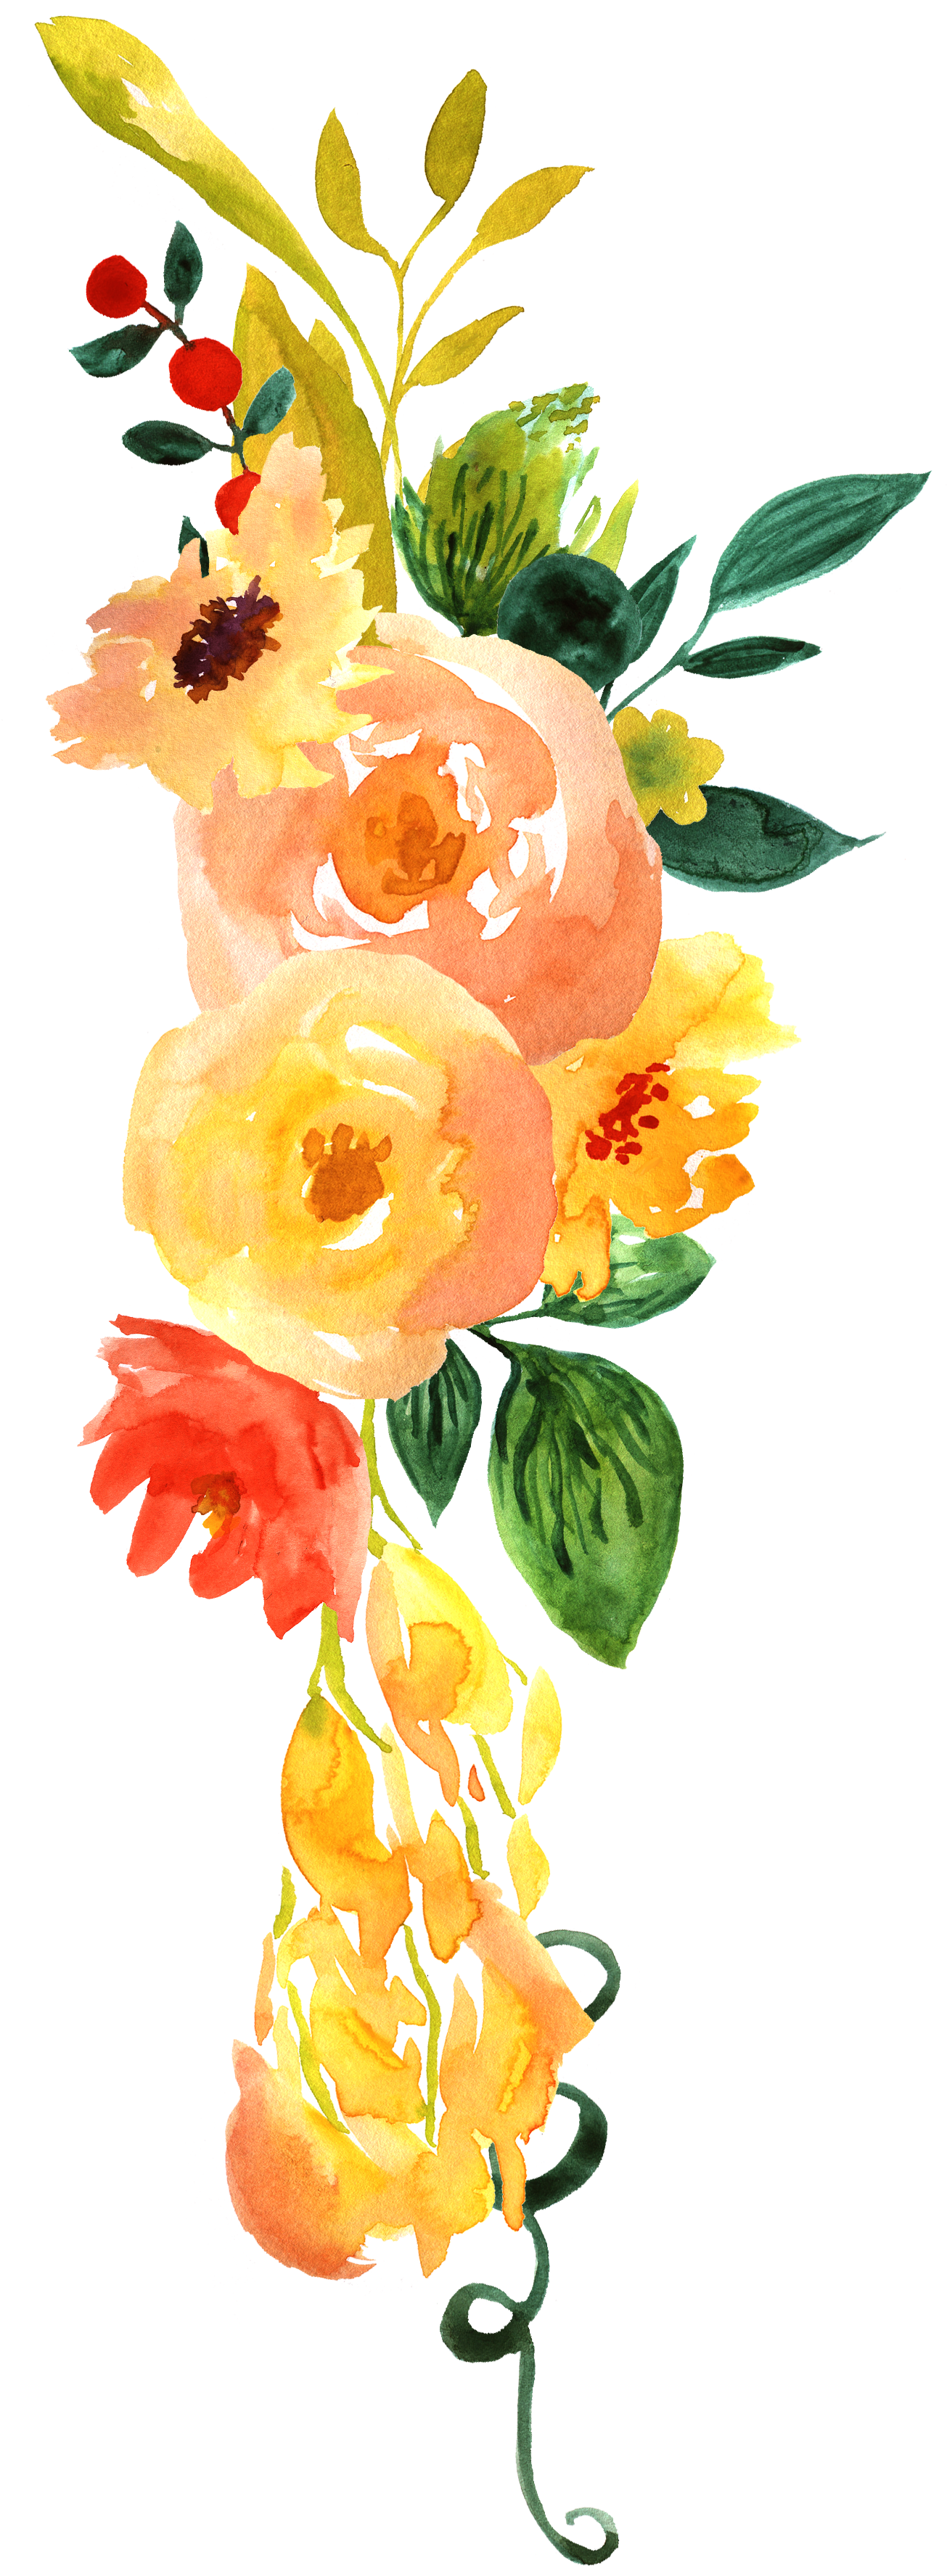 Floral Design Watercolor Painting Flower - Watercolor Painting (1616x3600)